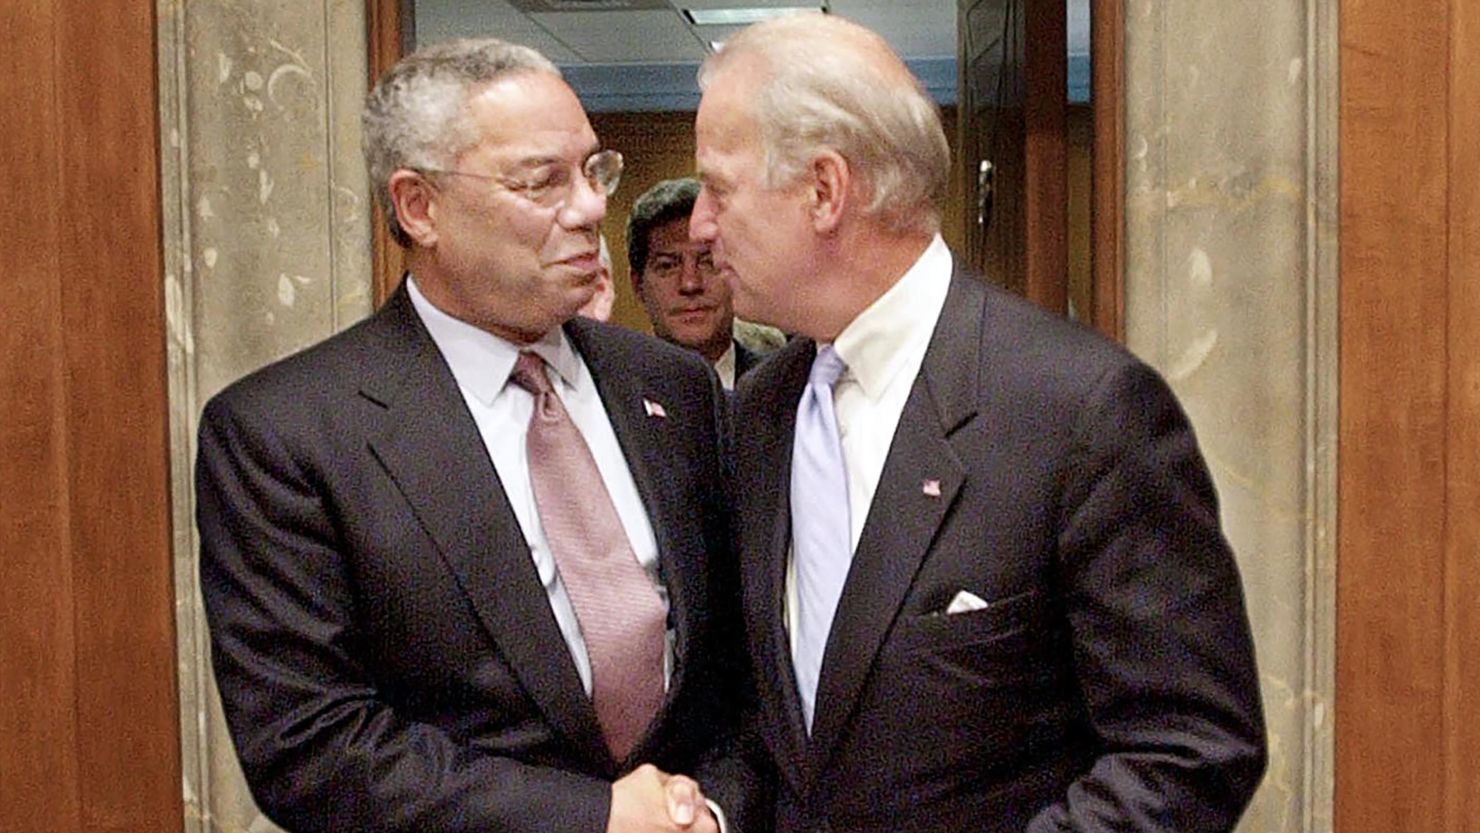 Then-US Secretary of State Colin Powell shakes hands with then-Chairman of the US Senate Foreign Relations Committee Joe Biden on September 26, 2002, on Capitol Hill in Washington, DC.